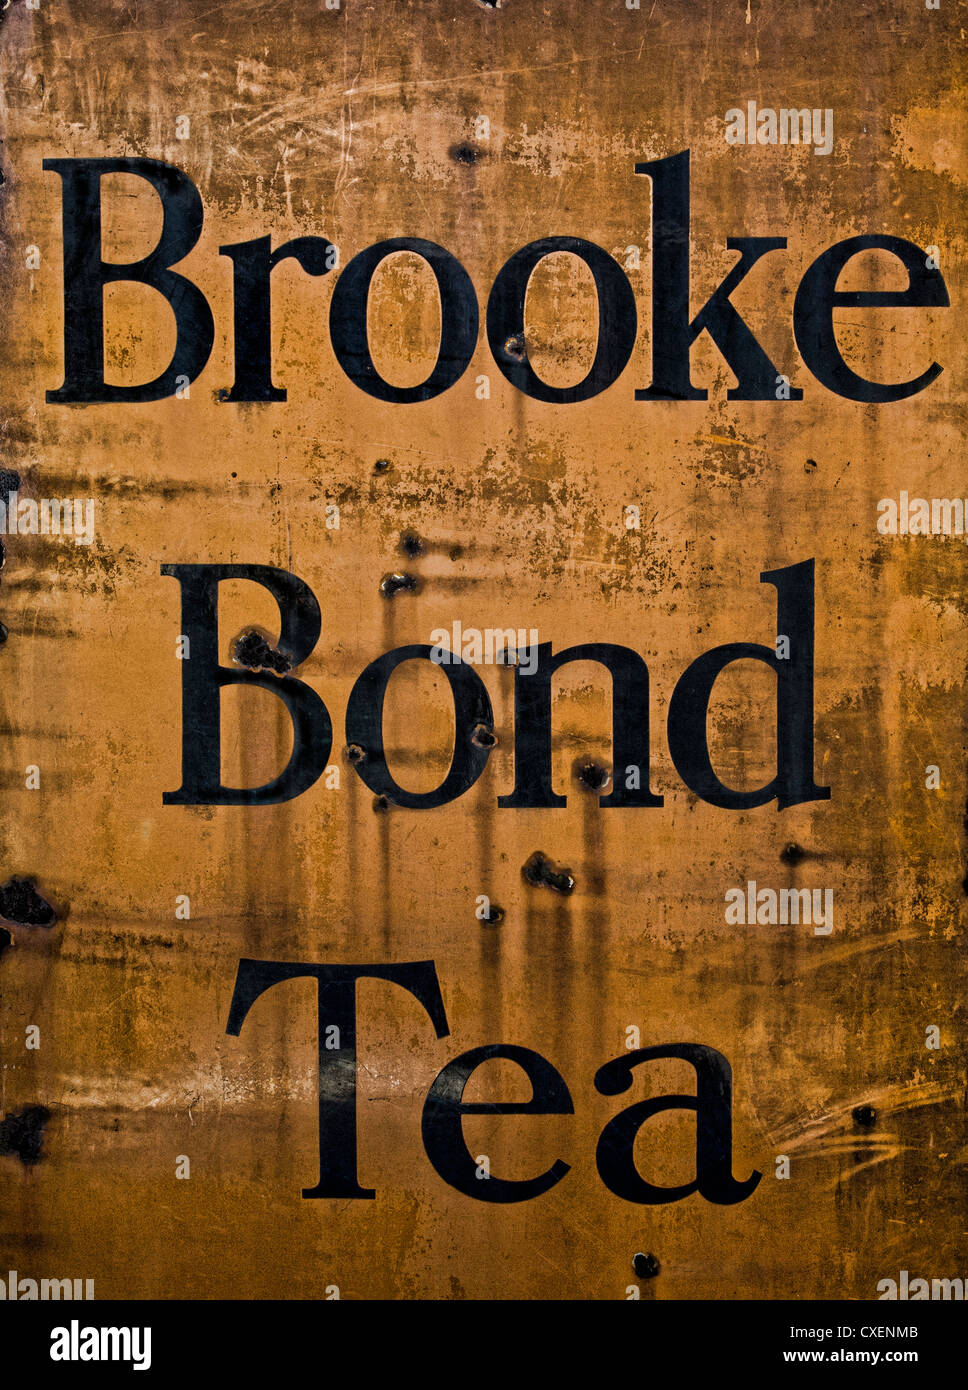 Enamel metal Brooke Bond Tea sign dating from the 1940's. Rusting and oxidised. Stock Photo